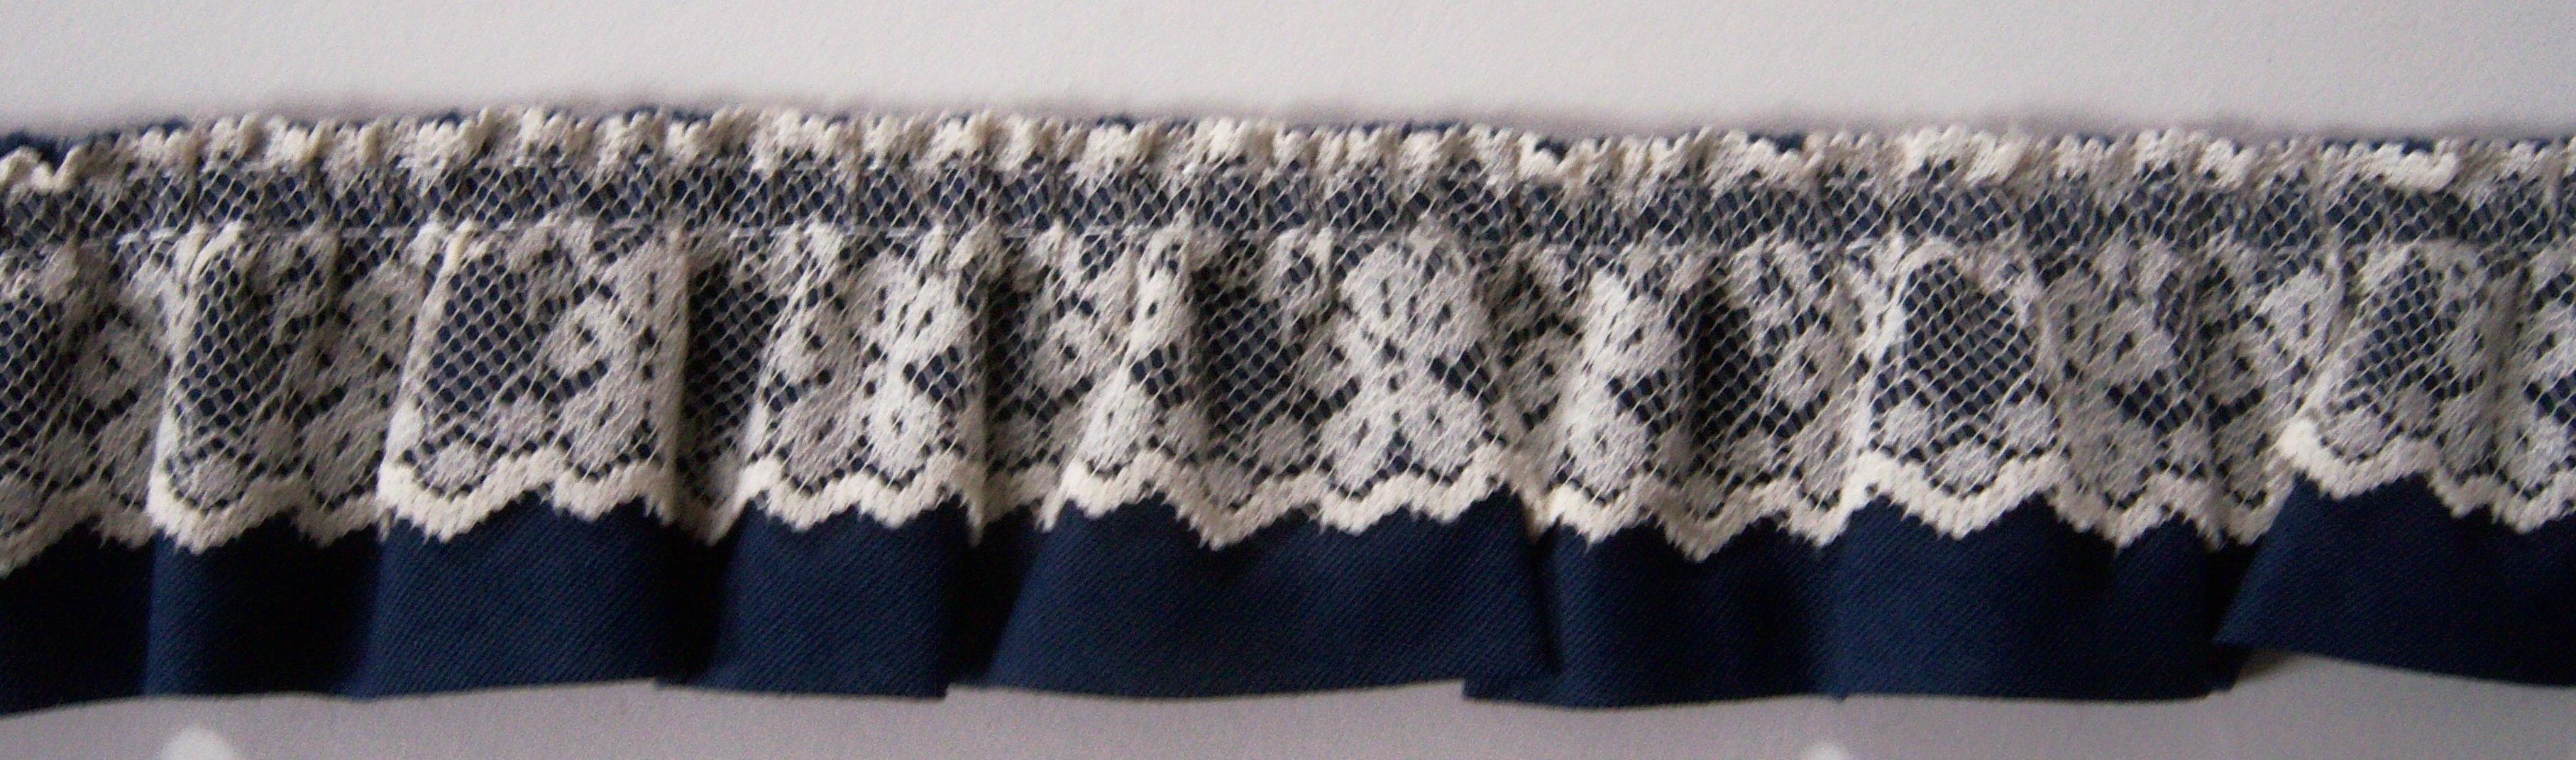 Natural Lace/Navy Ruffled Poly Cotton